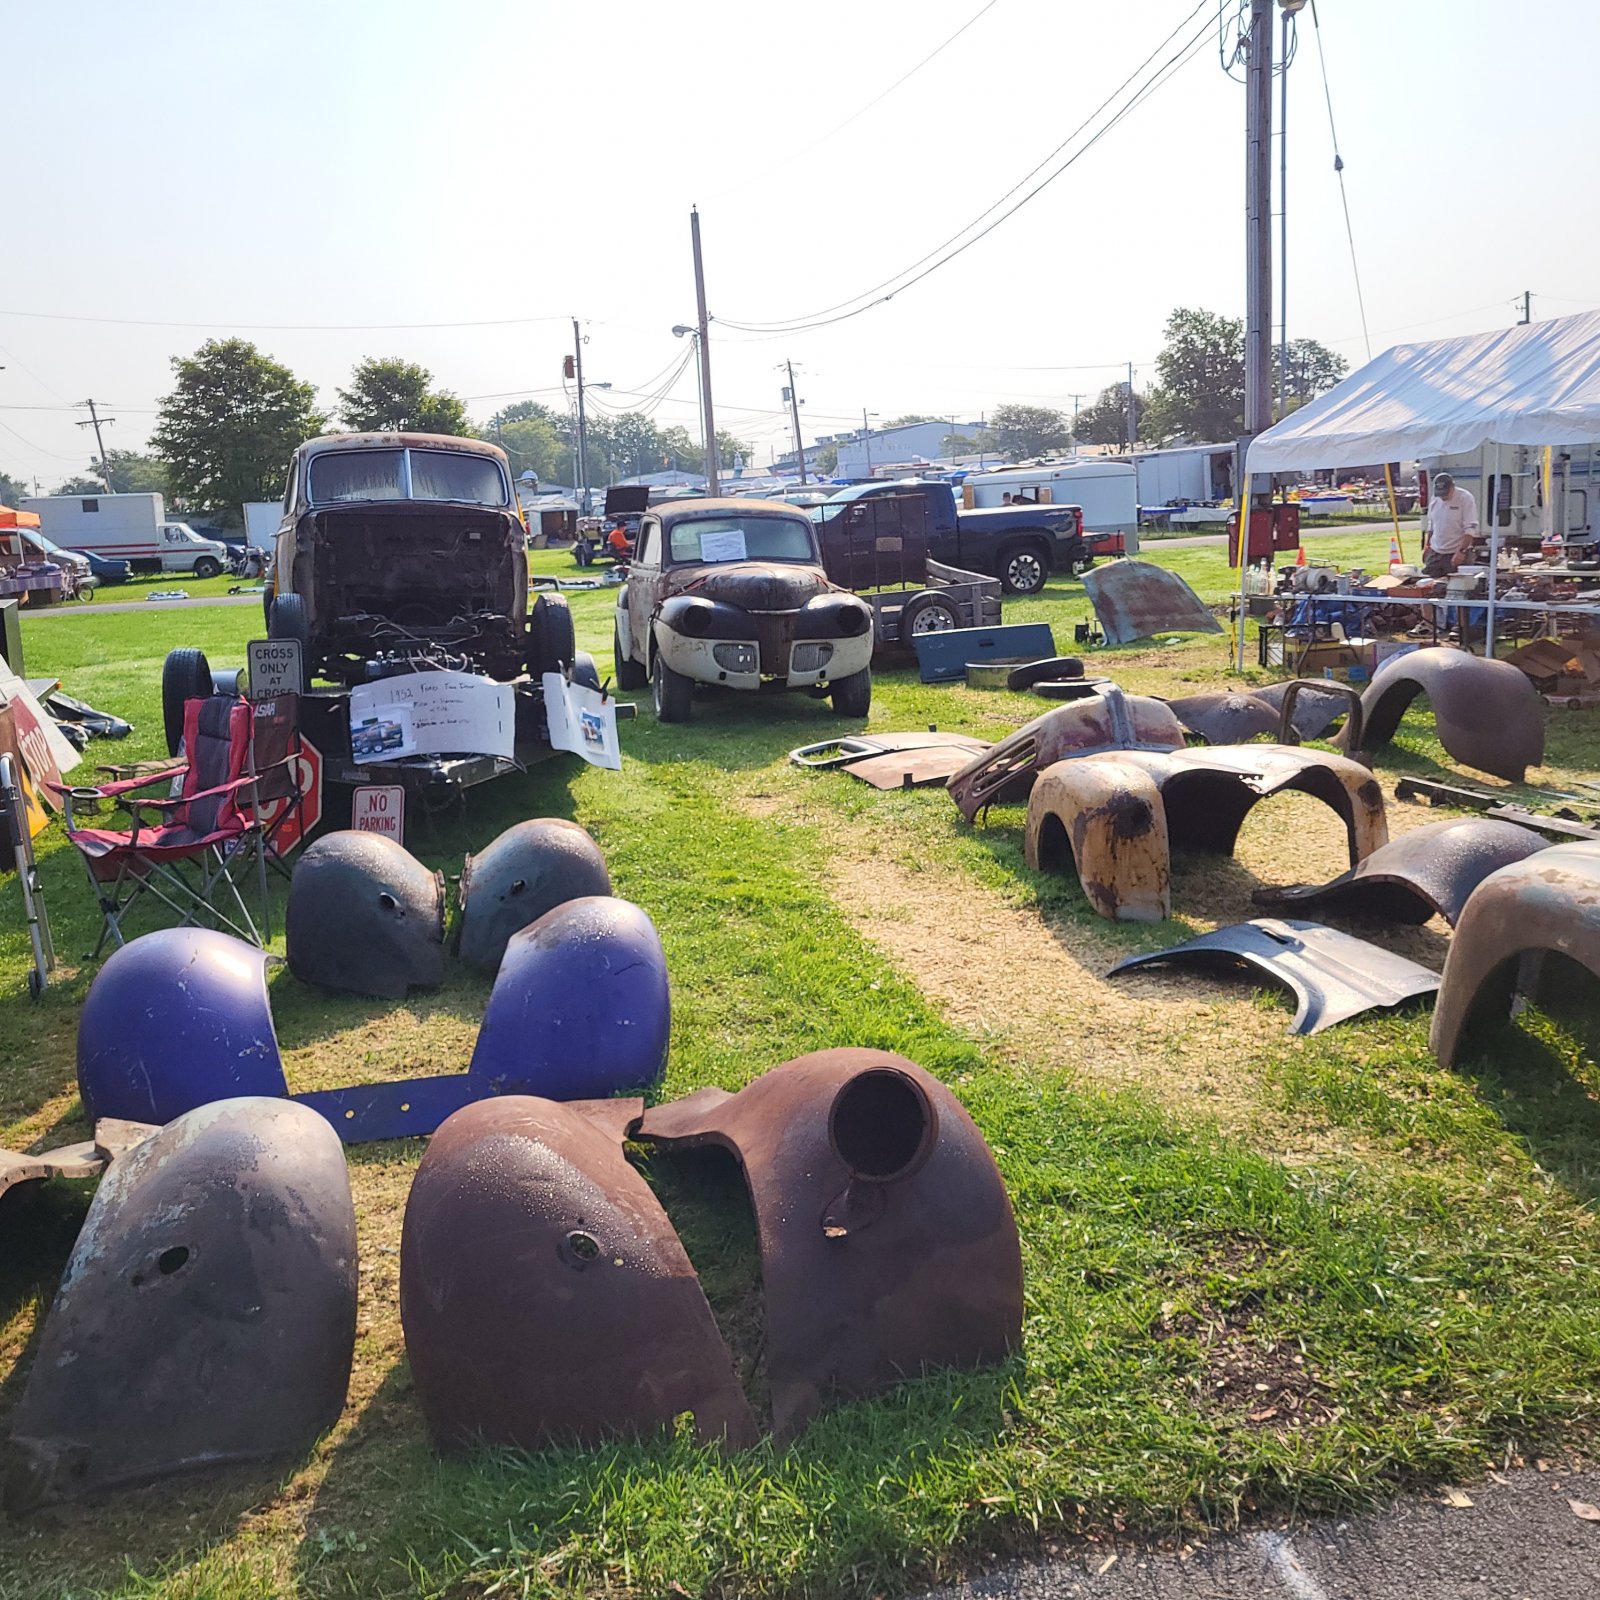 Event Coverage Scenes from the Canfield Ohio swap meet The H.A.M.B.